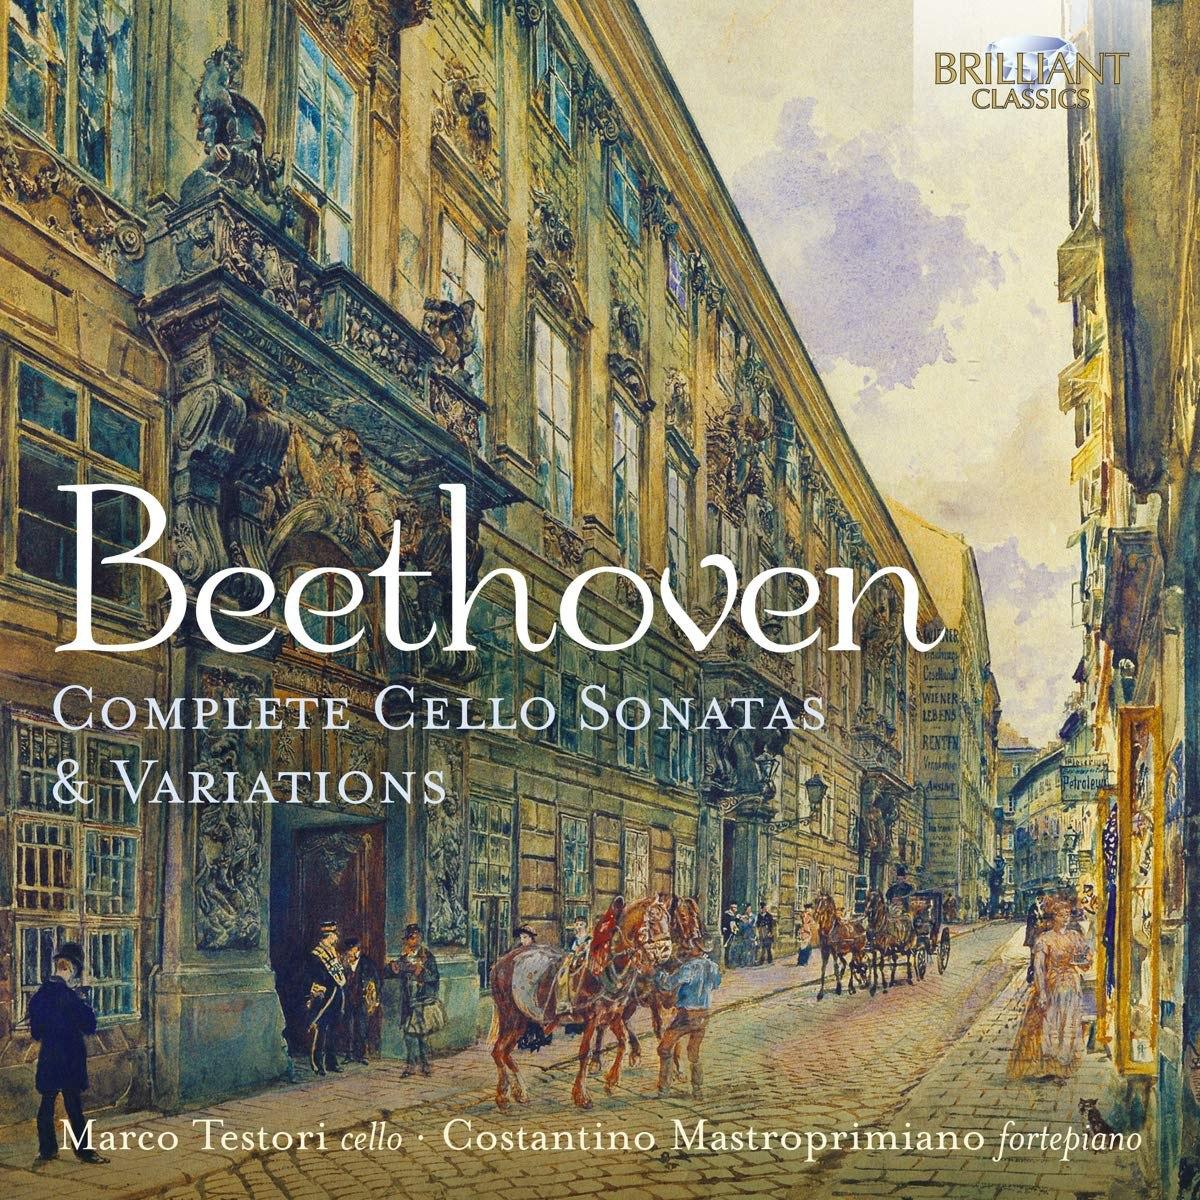 Beethoven Complete Cello Sonatas and Variations